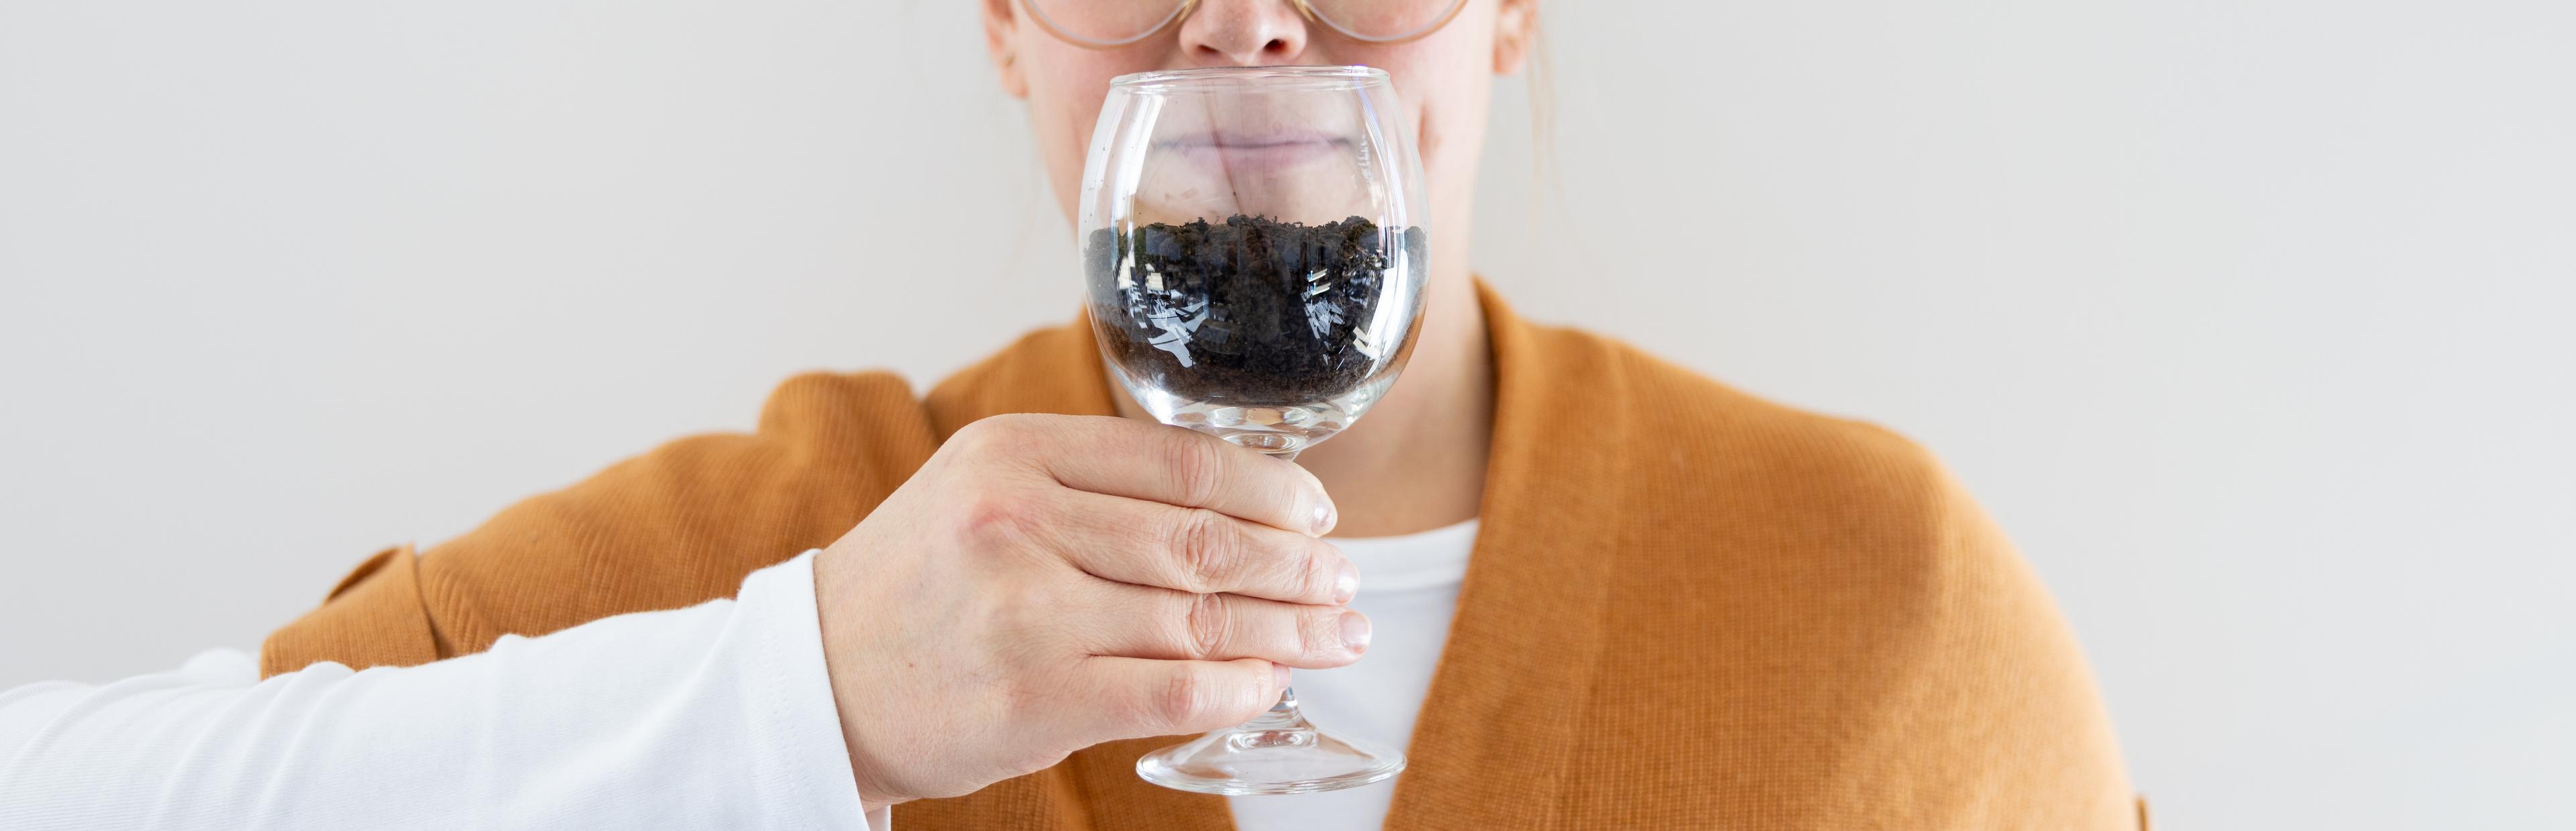 A woman sniffs a wine glass that is half full of soil.